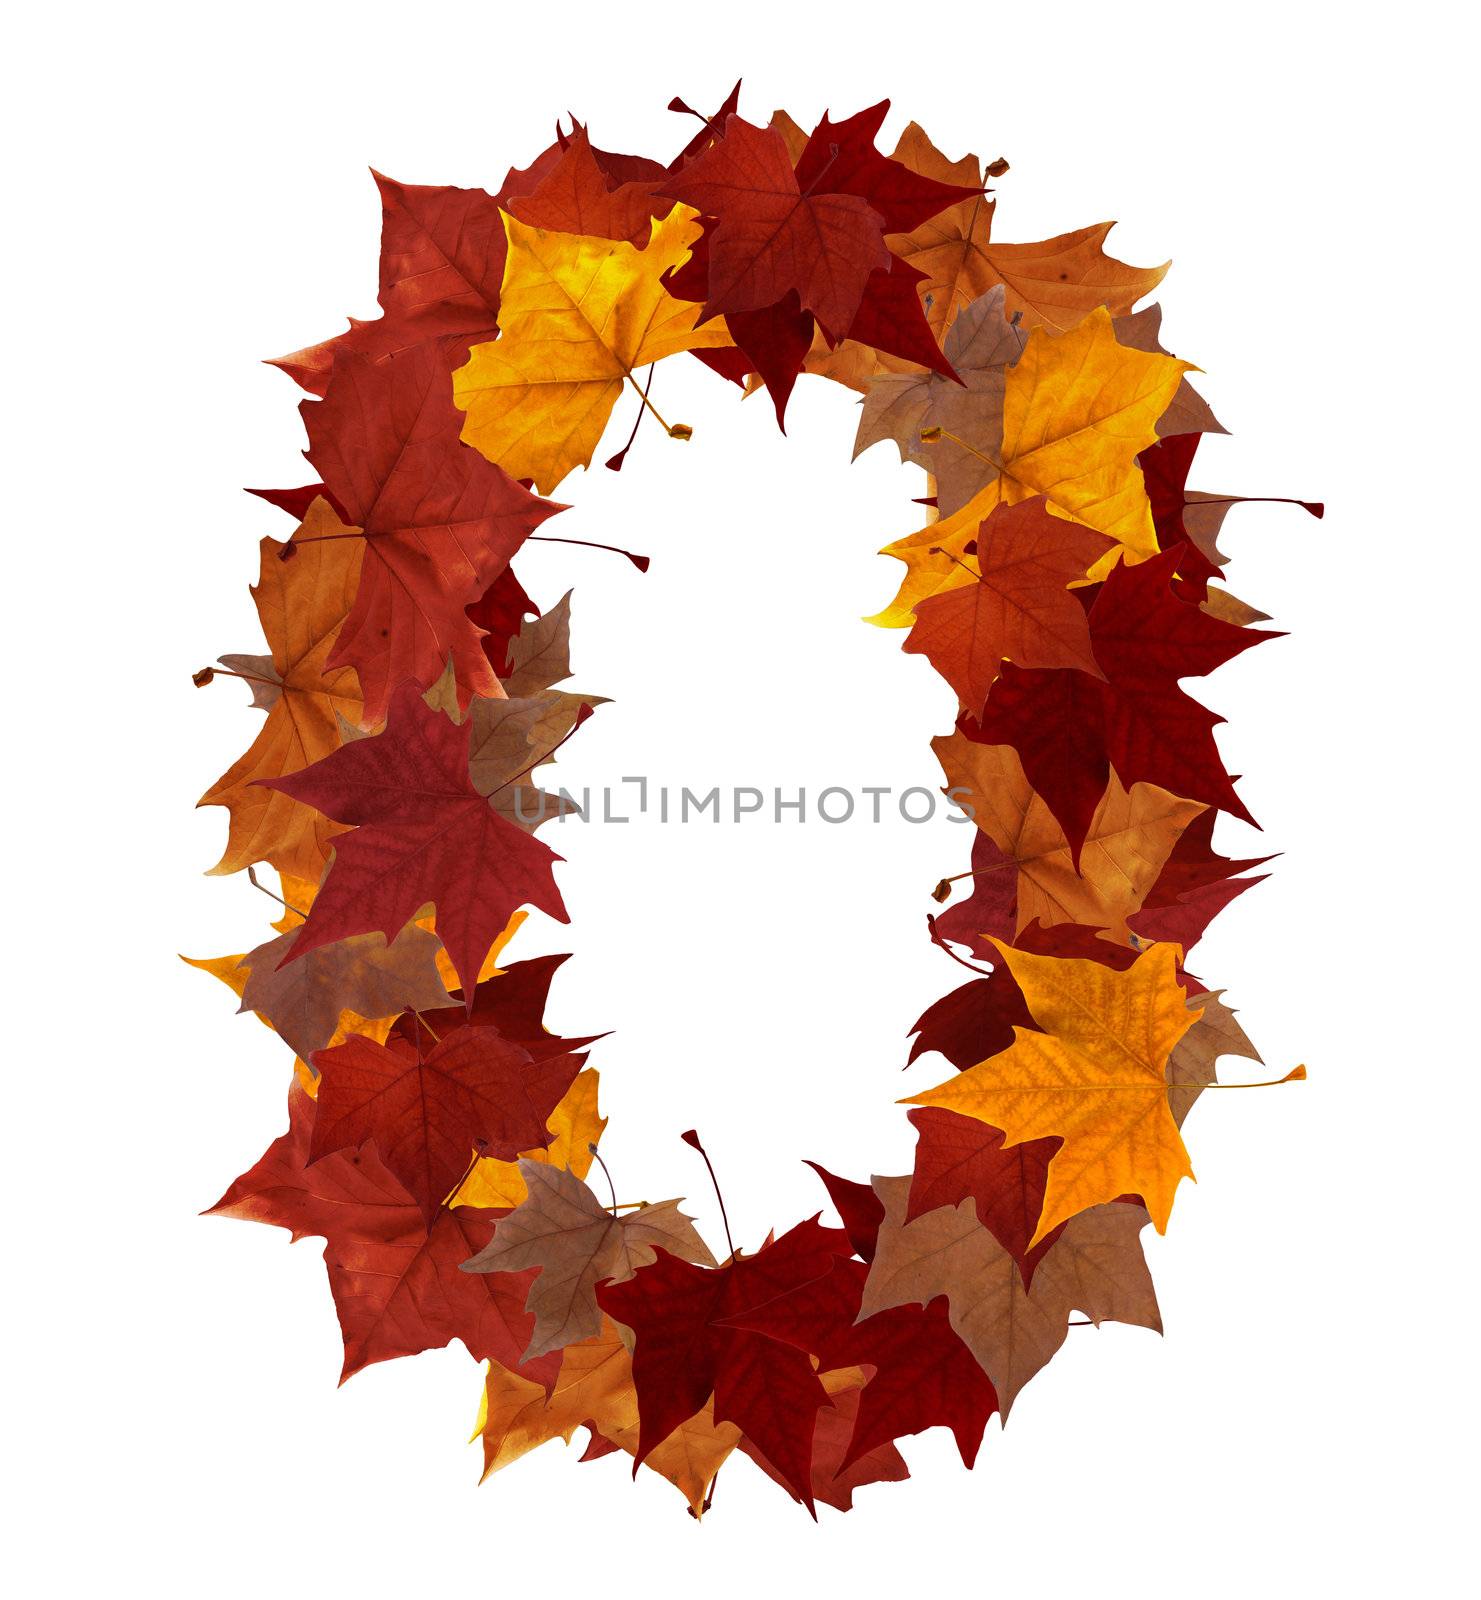 Number zero made with autumn leaves isolated on white with clipping path. So you can easily cut it out and place over the top of a design. Find others symbols in our portfolio to compose your own words.